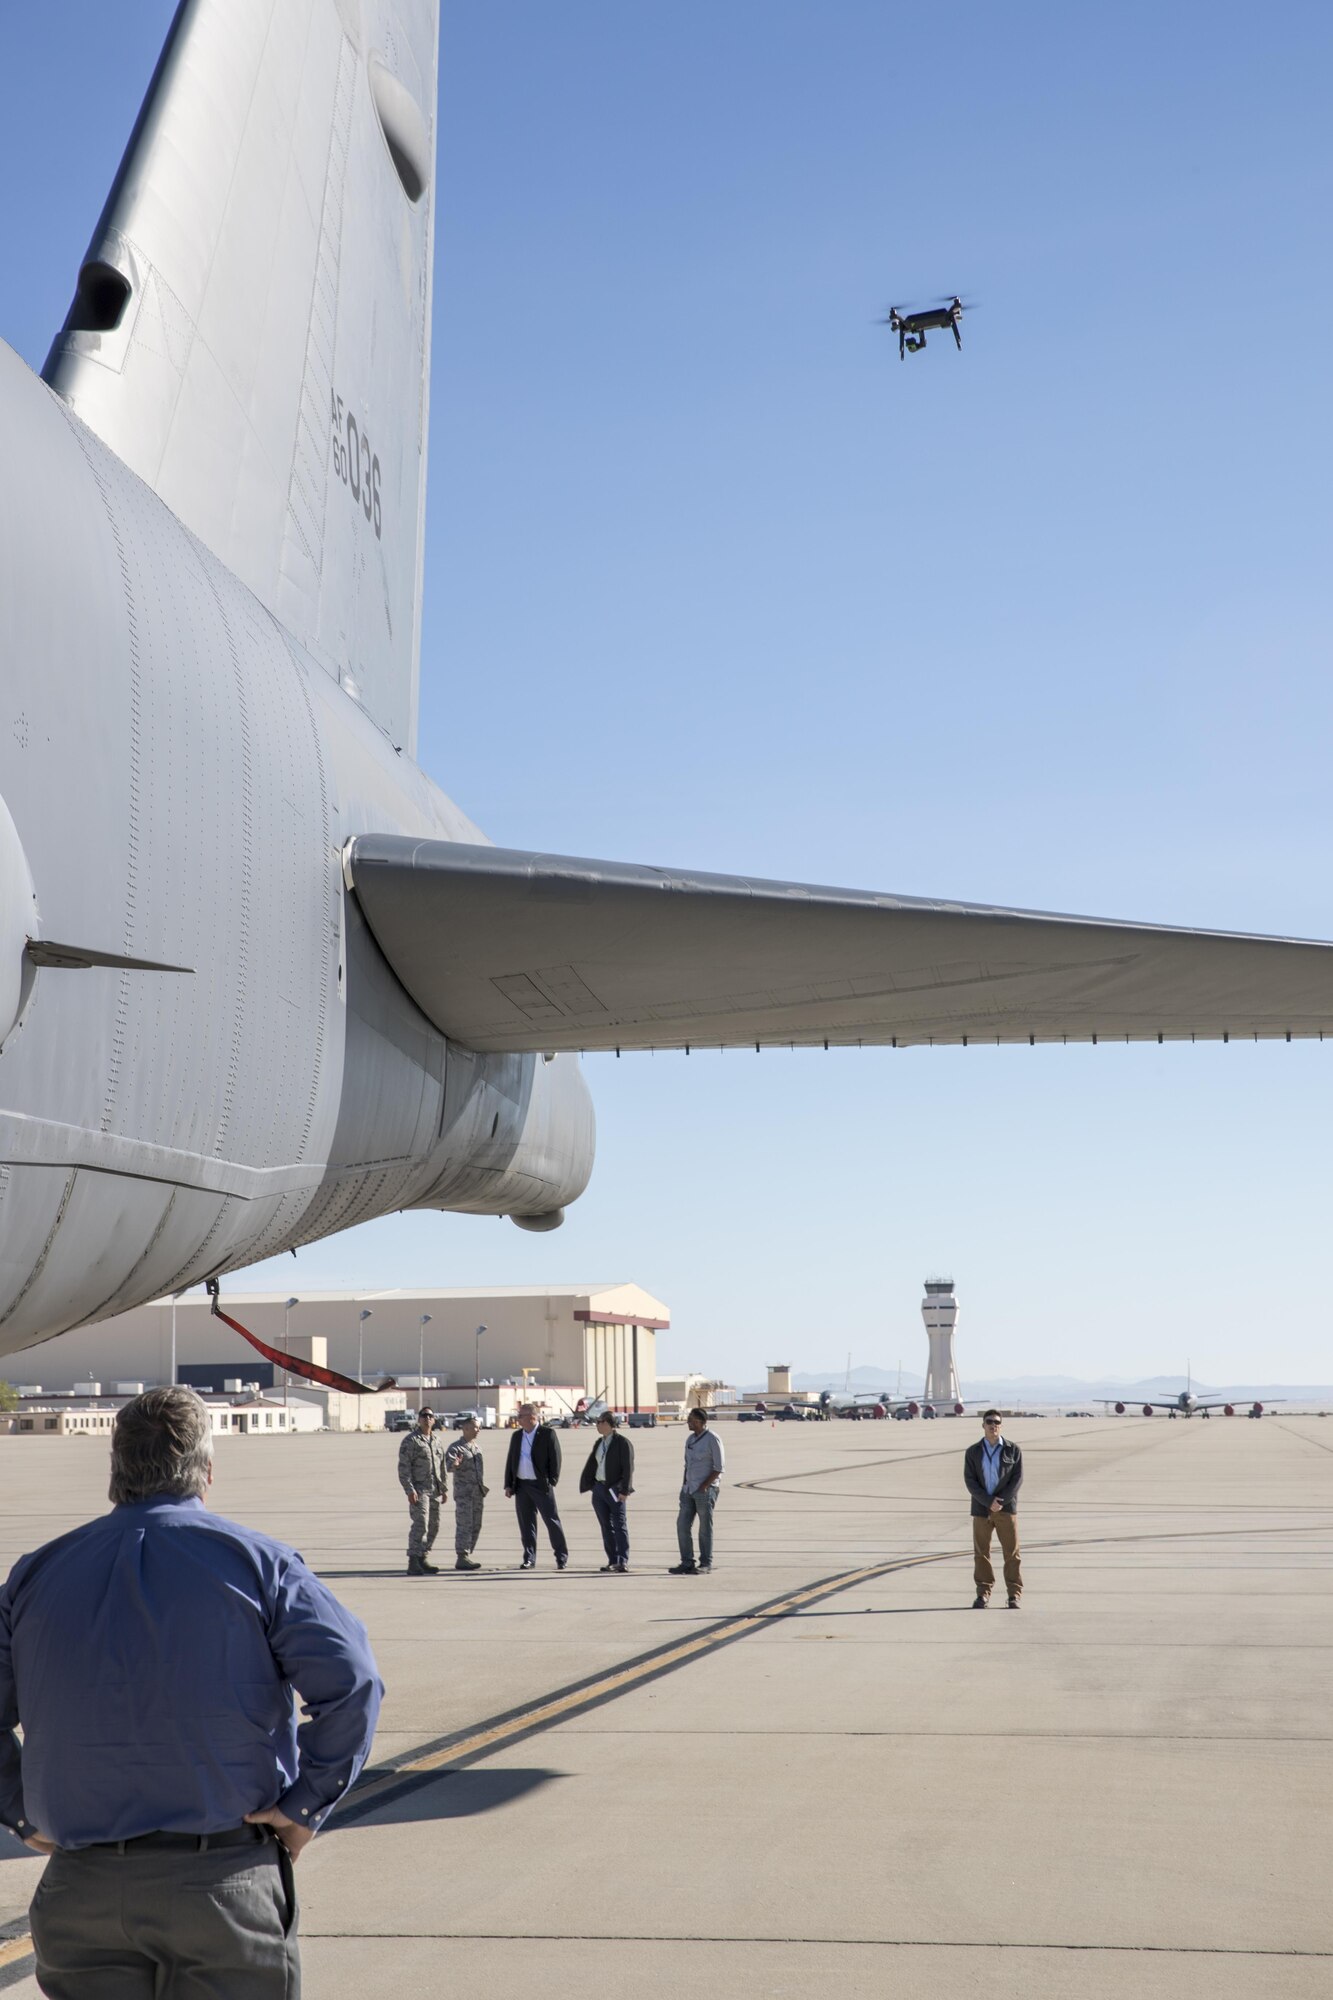 On March 16, the Emerging Technologies Combined Test Force used a small quadcopter equipped with a camera to perform a visual inspection of a B-52 Stratofortress. This was the first-ever test using a small unmanned aerial system near an active taxiway on an Air Force flightline.
(U.S. Air Force photo by Christian Turner)